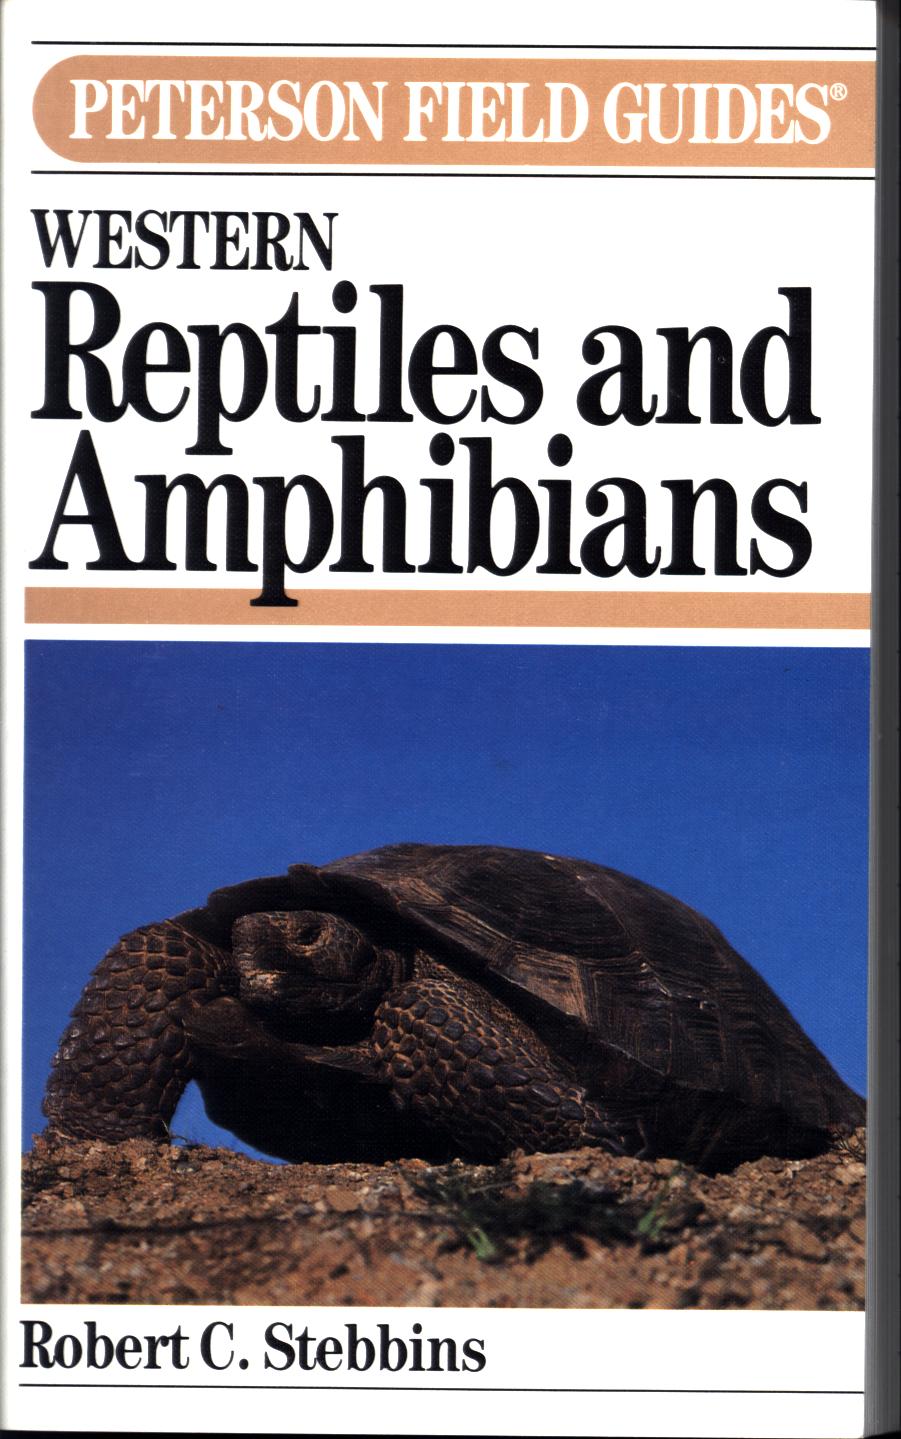 A FIELD GUIDE TO WESTERN REPTILES AND AMPHIBIANS.